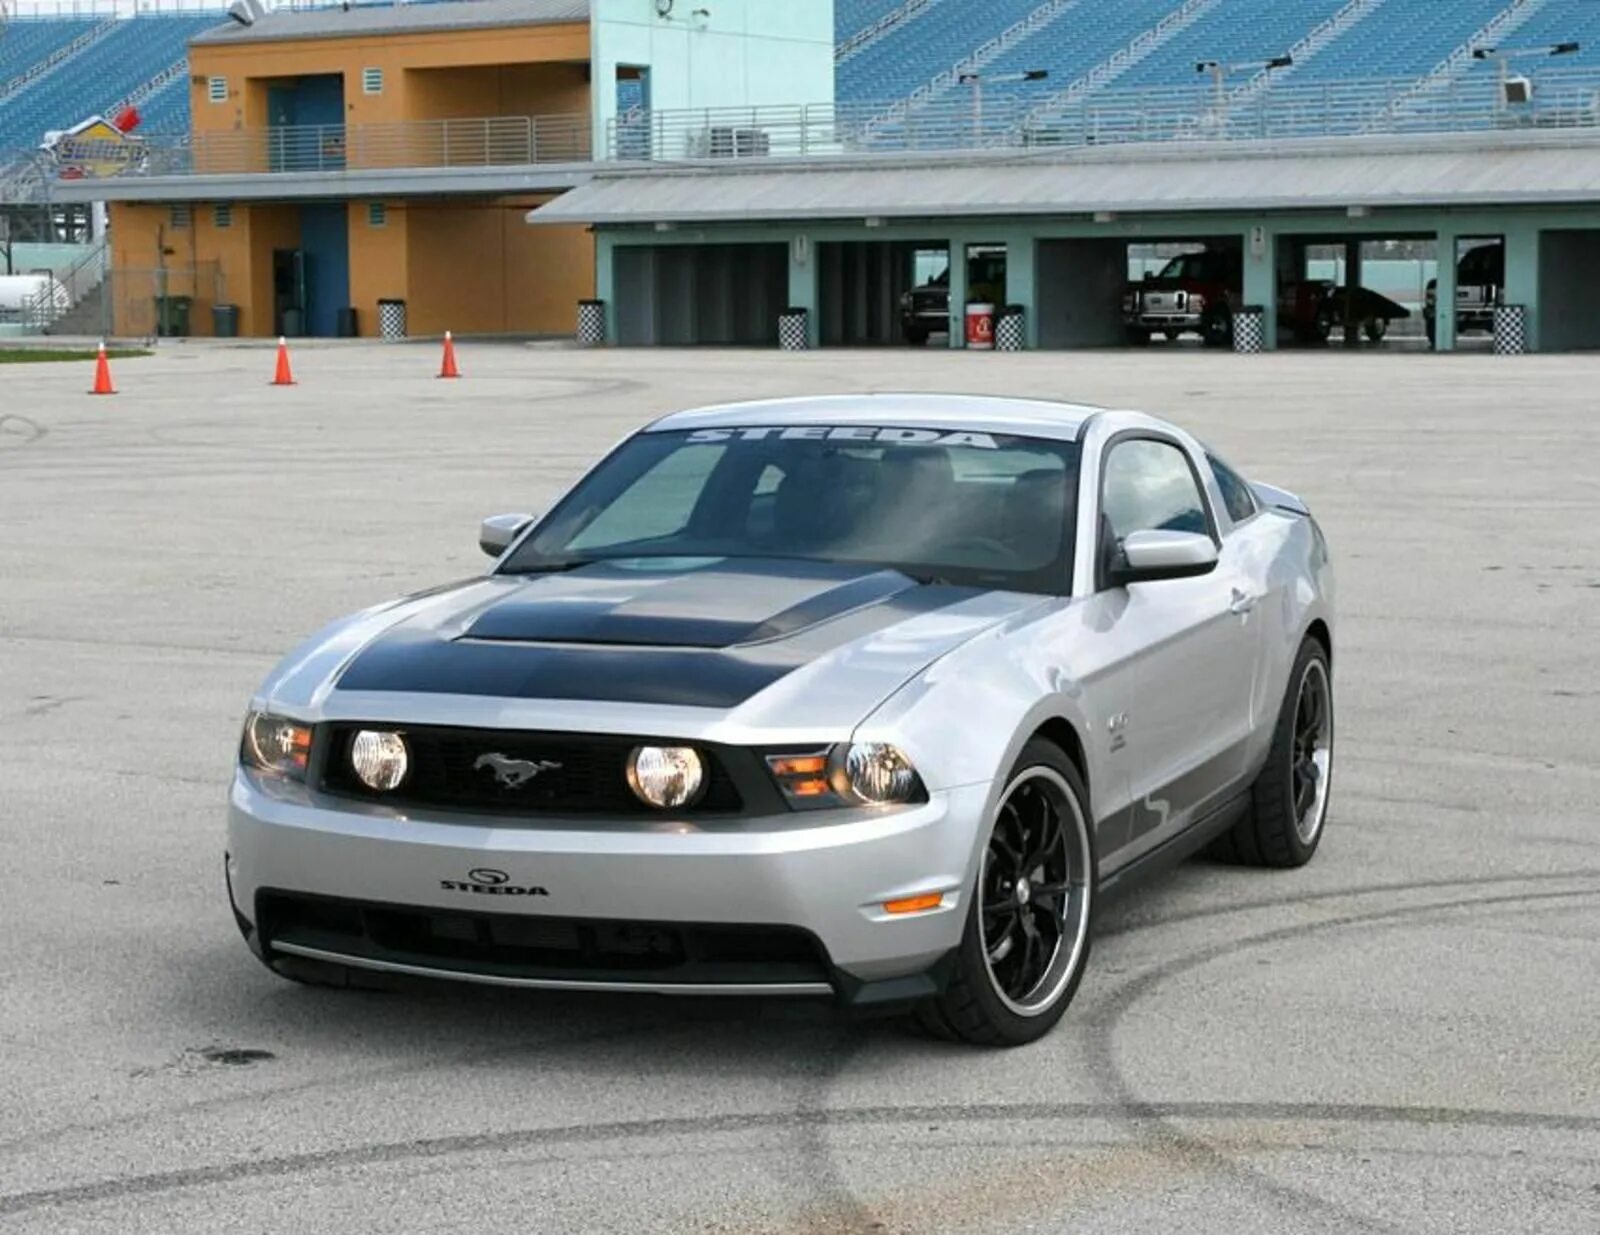 Форд мустанг 5.0. Ford Mustang gt 2011. Ford Mustang 5.0 2011. 2011 Ford Mustang gt 5.0 s197.